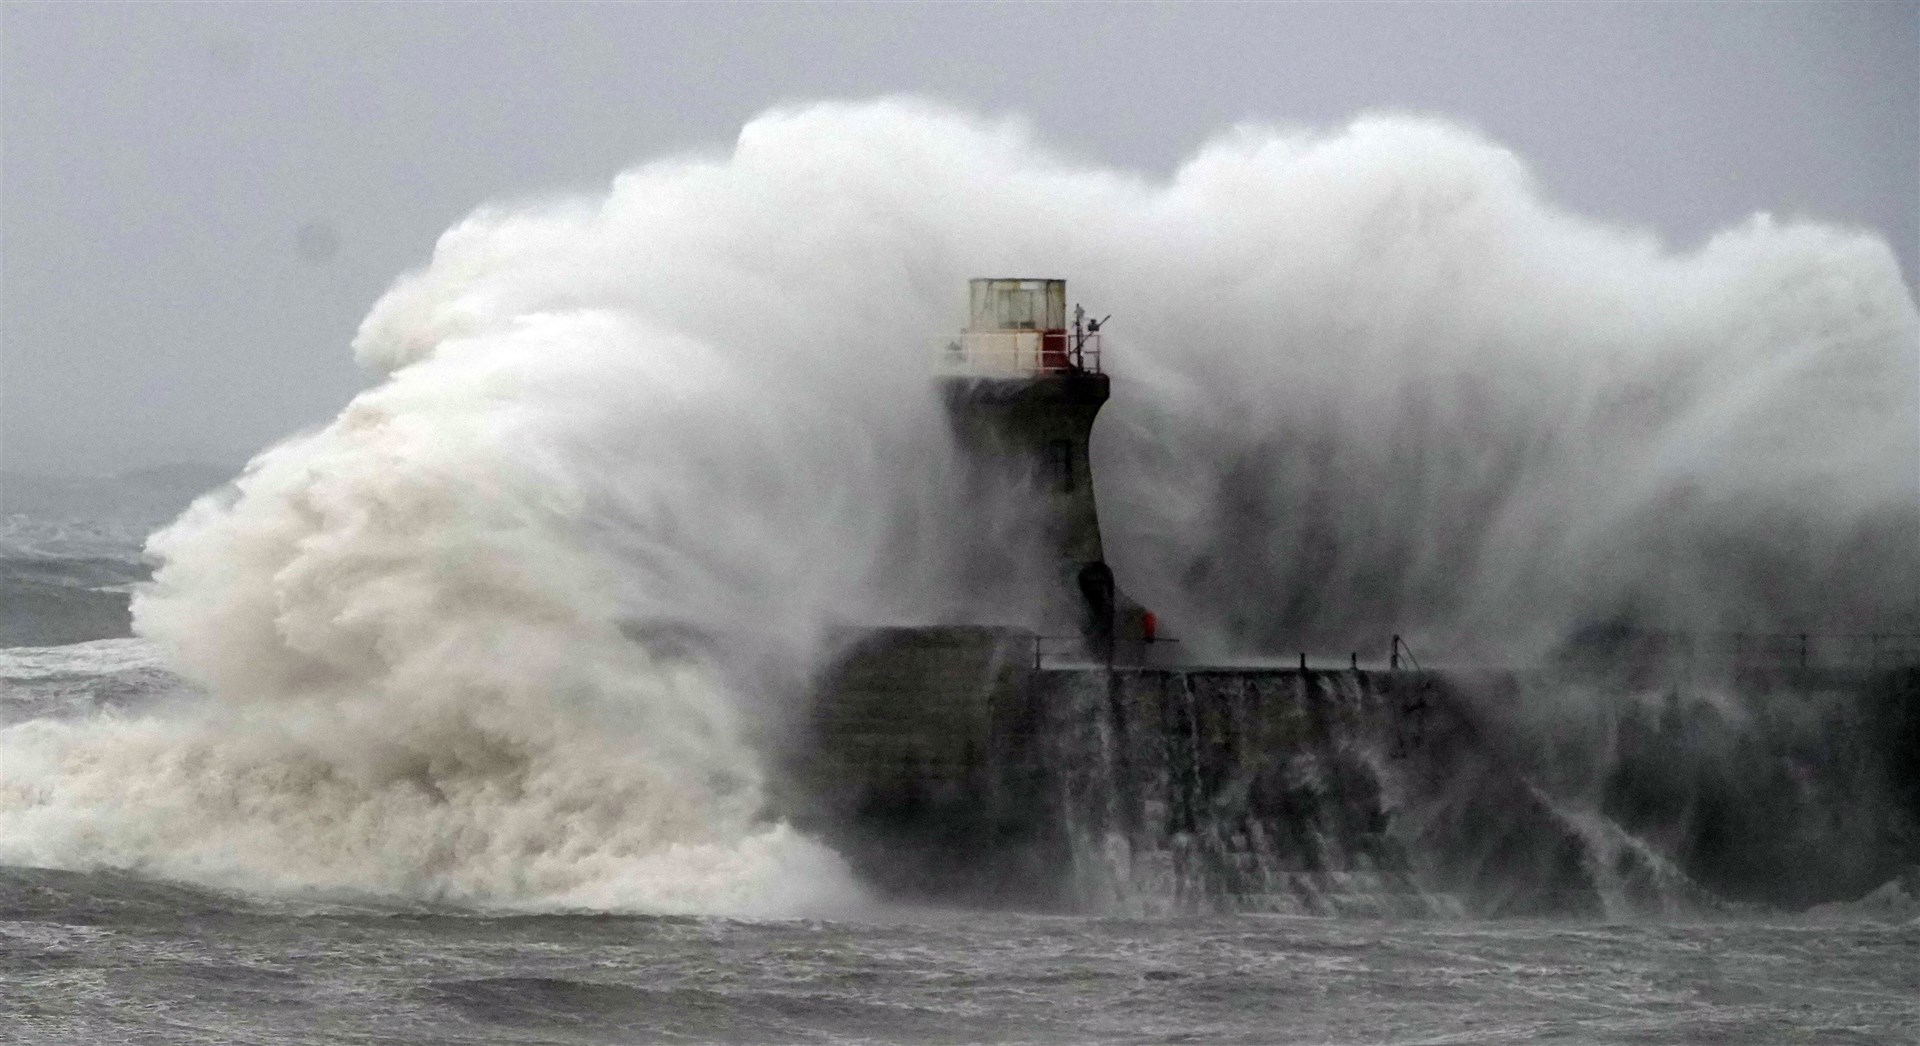 The lighthouse at South Shields was damaged in the storm (Owen Humphreys/PA)